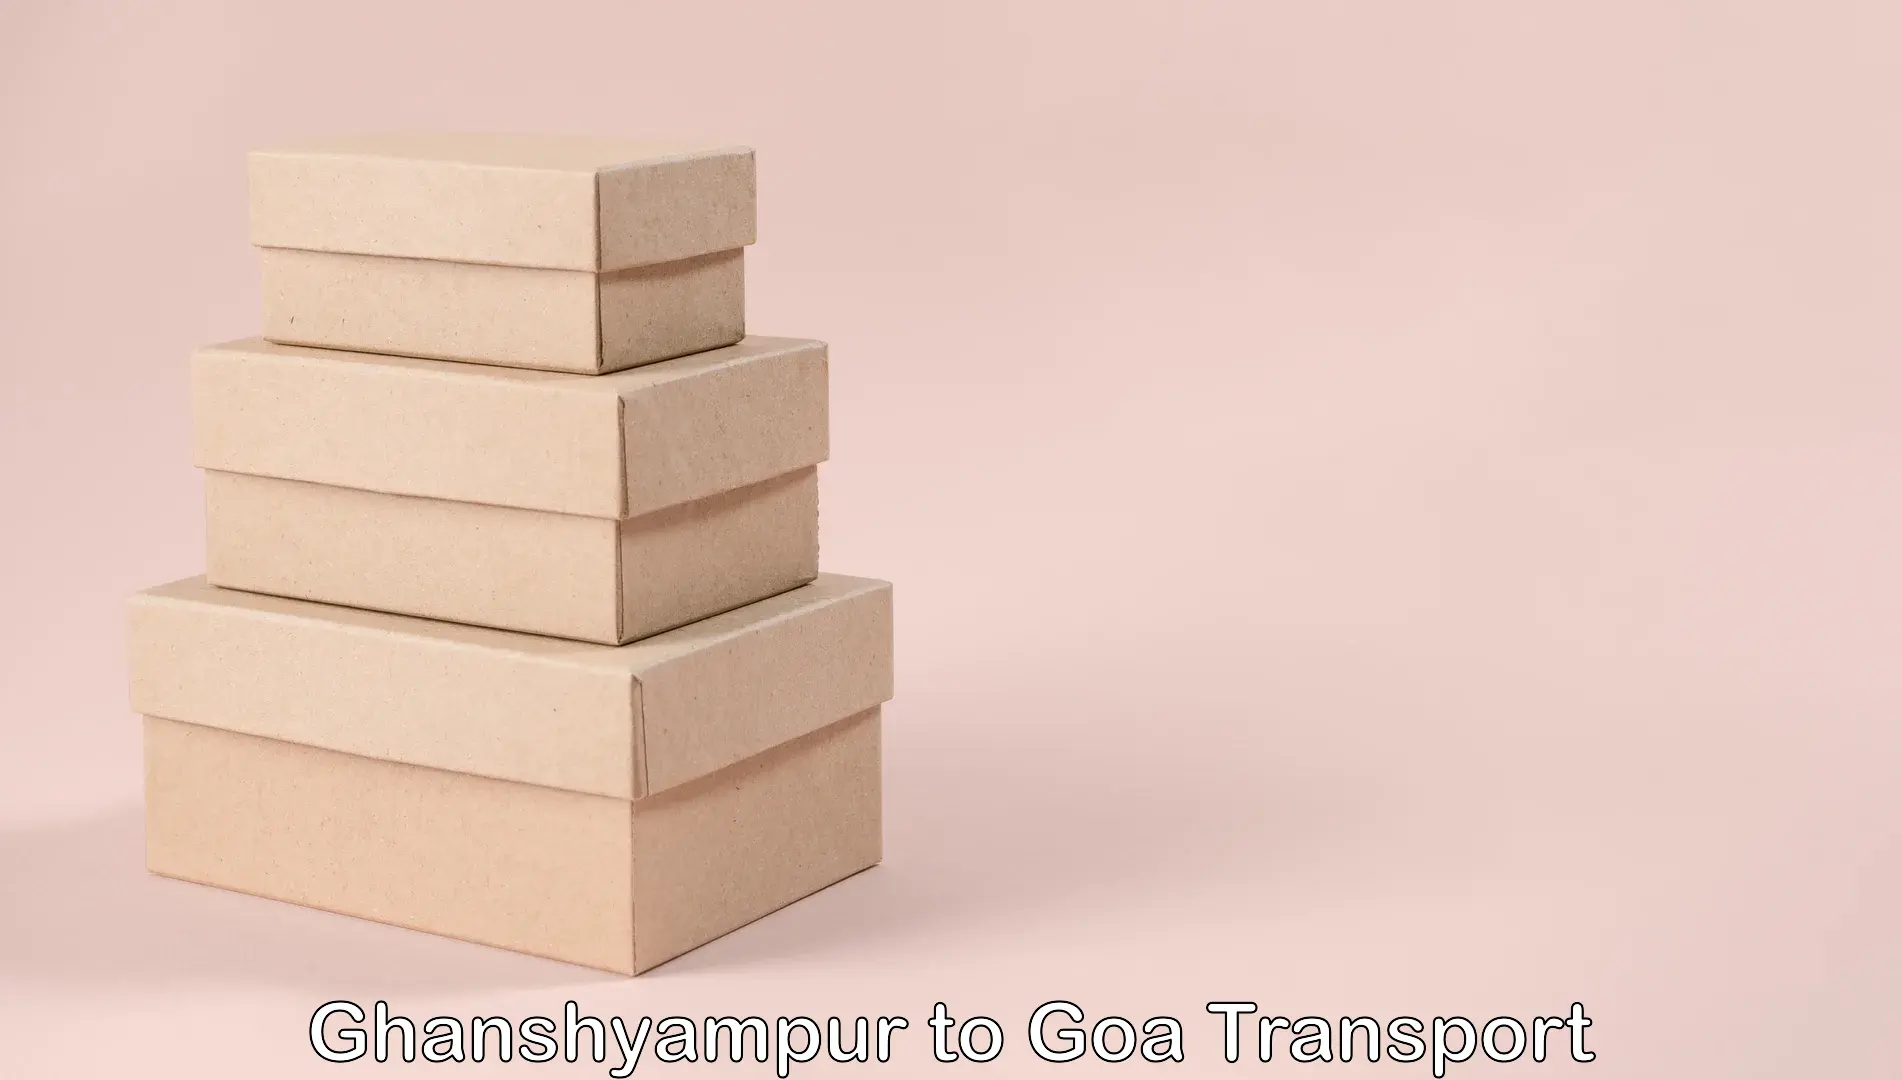 All India transport service Ghanshyampur to IIT Goa